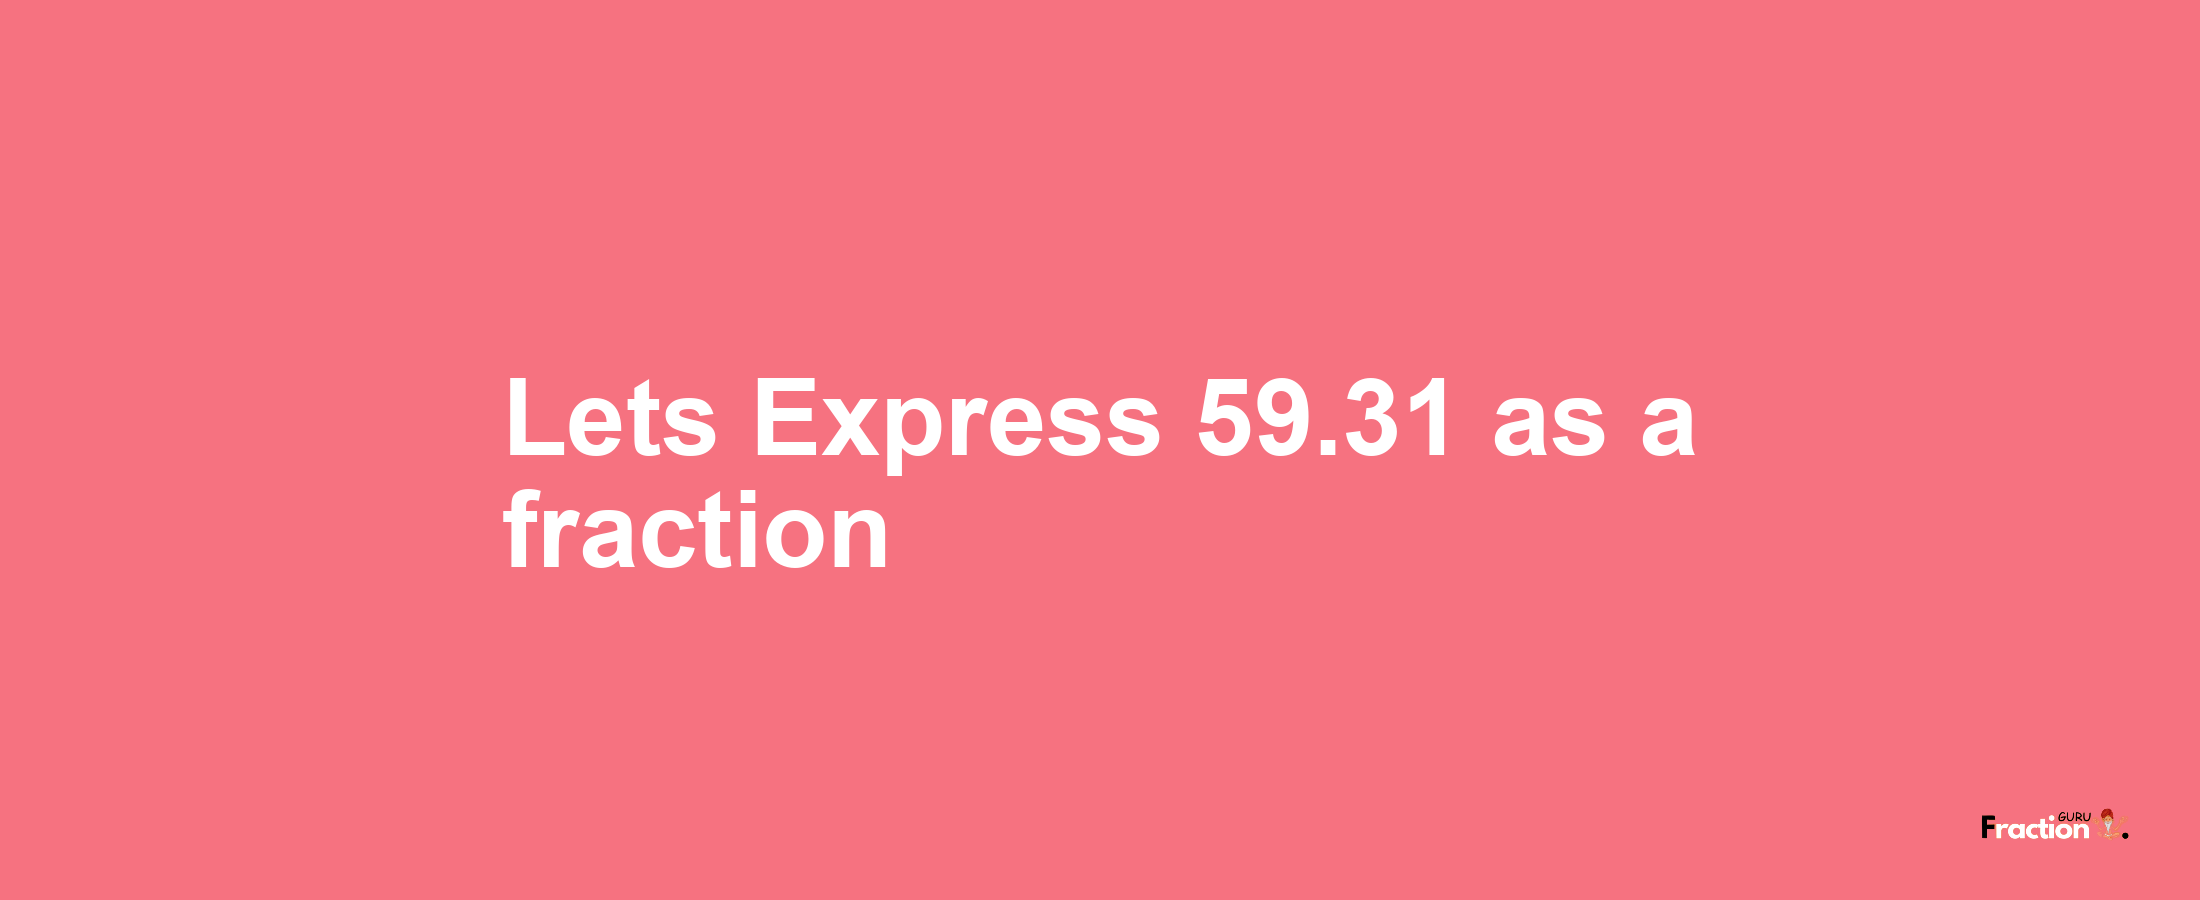 Lets Express 59.31 as afraction